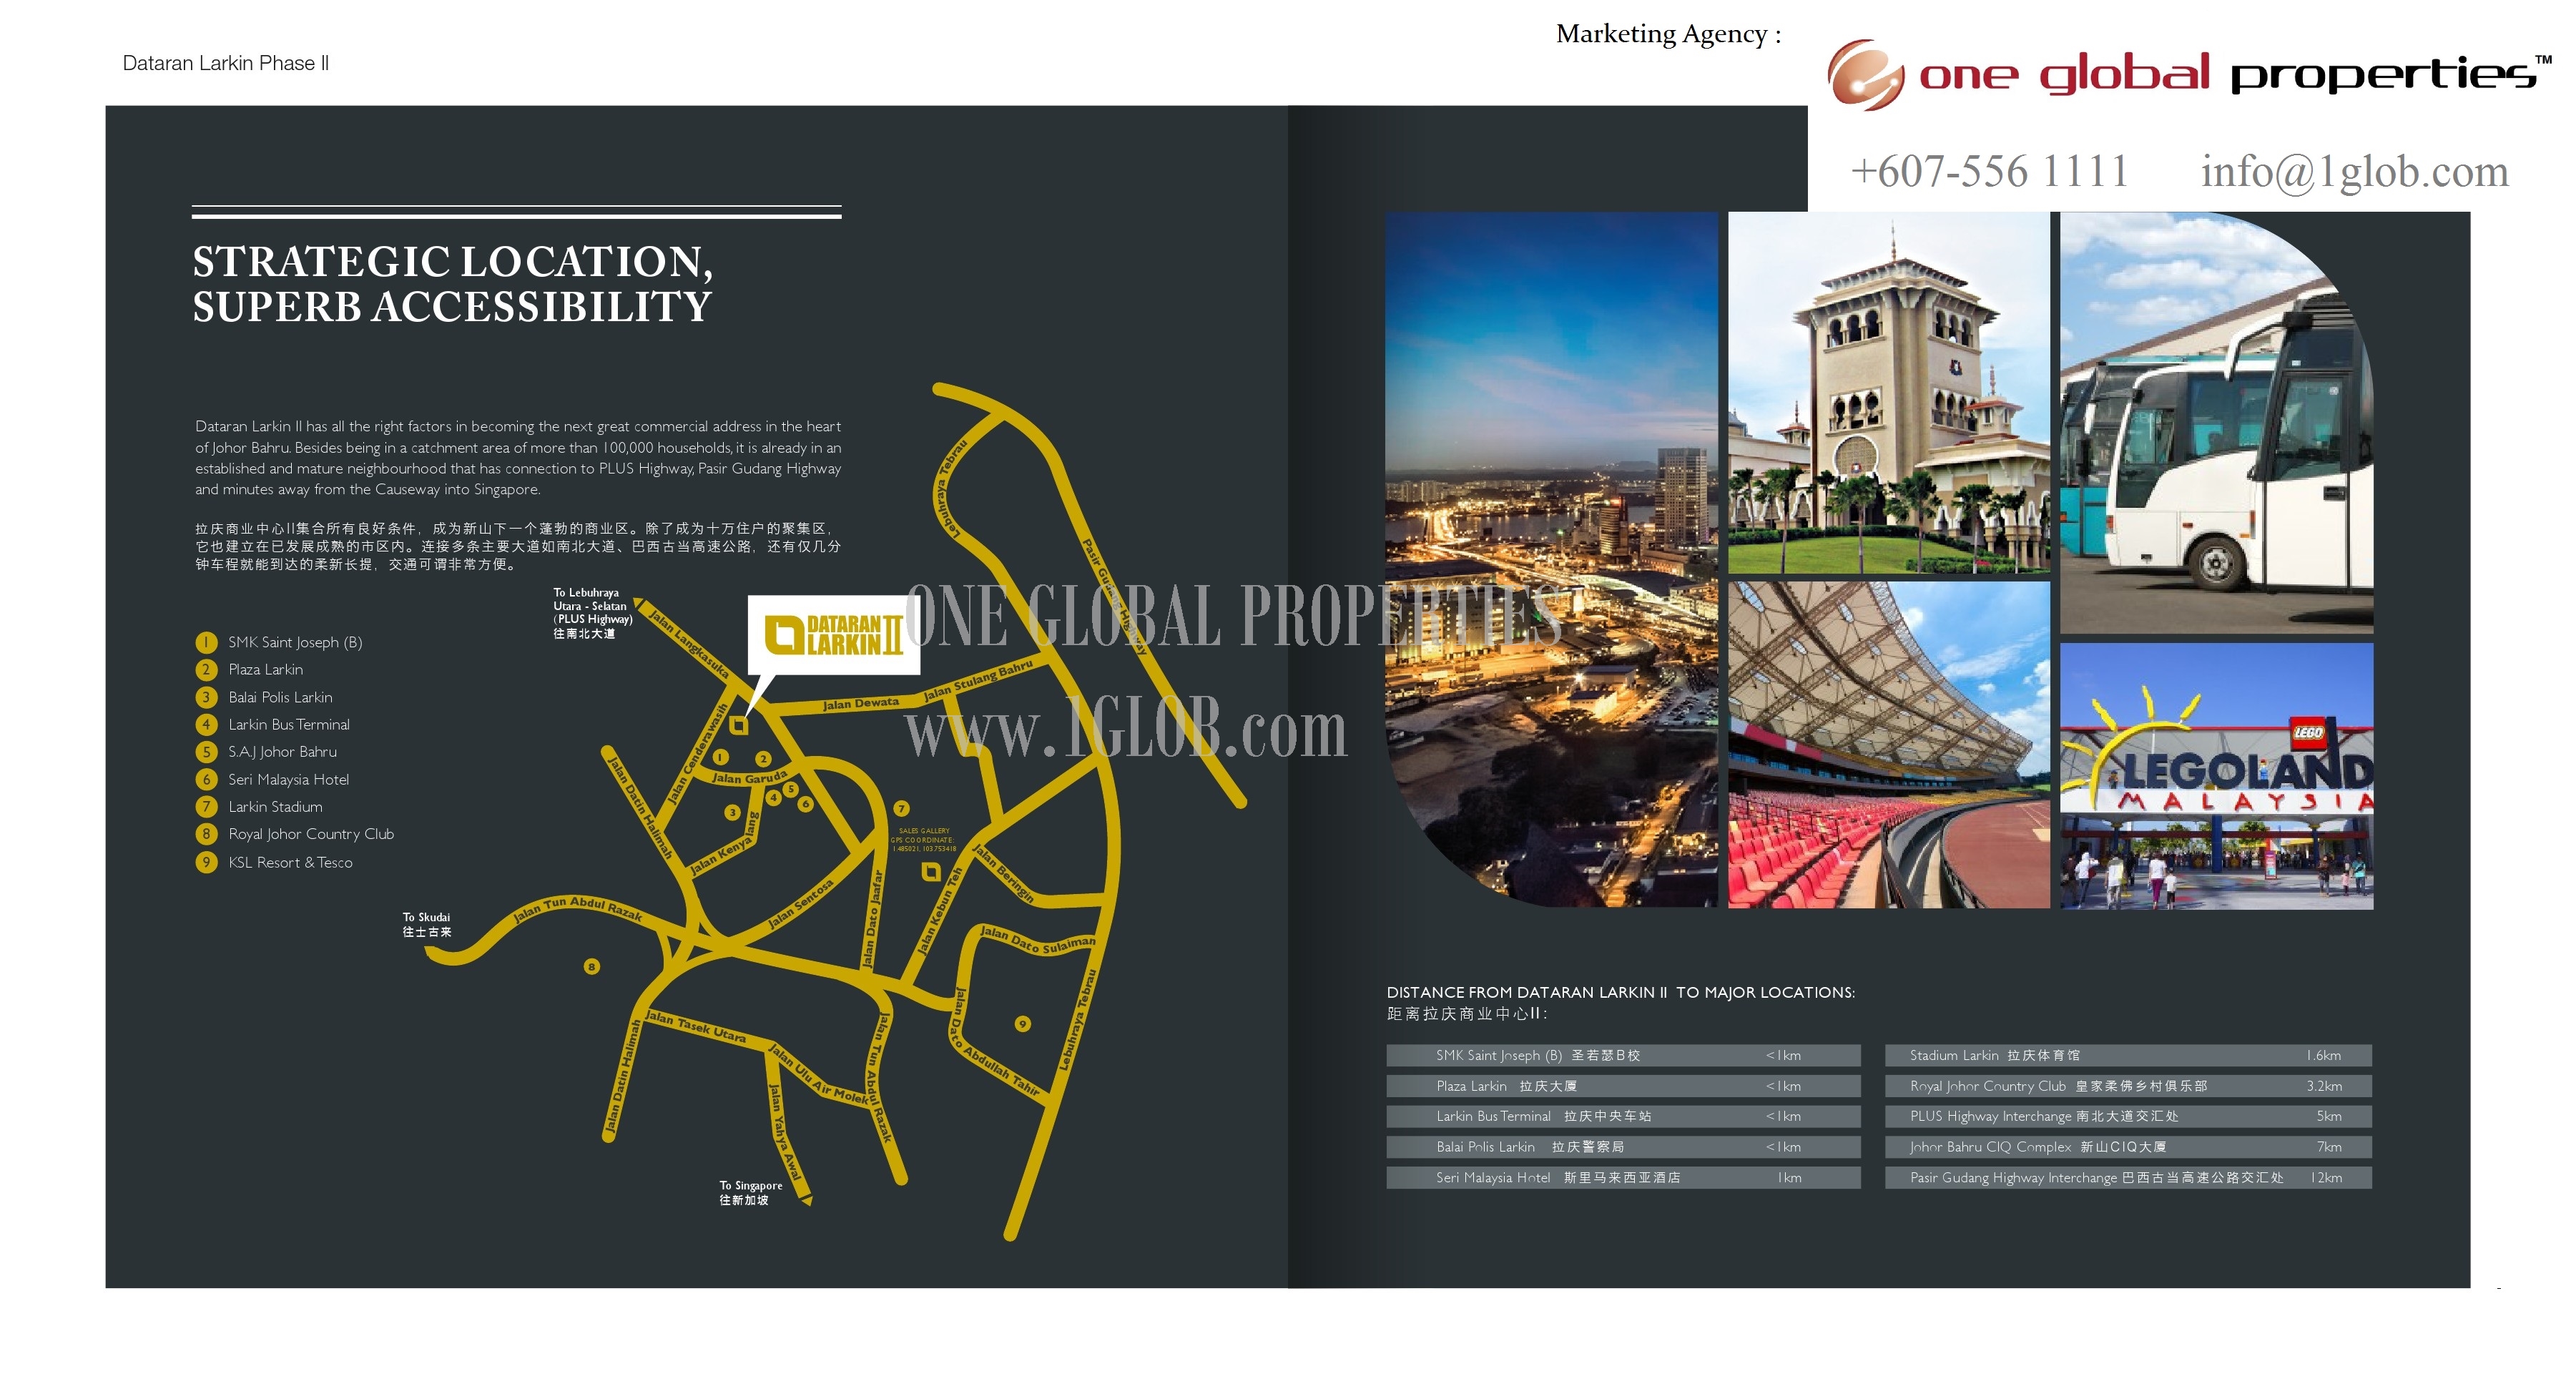 Dataran Larkin Project Brochure Page 3 (This link will open a PDF document)